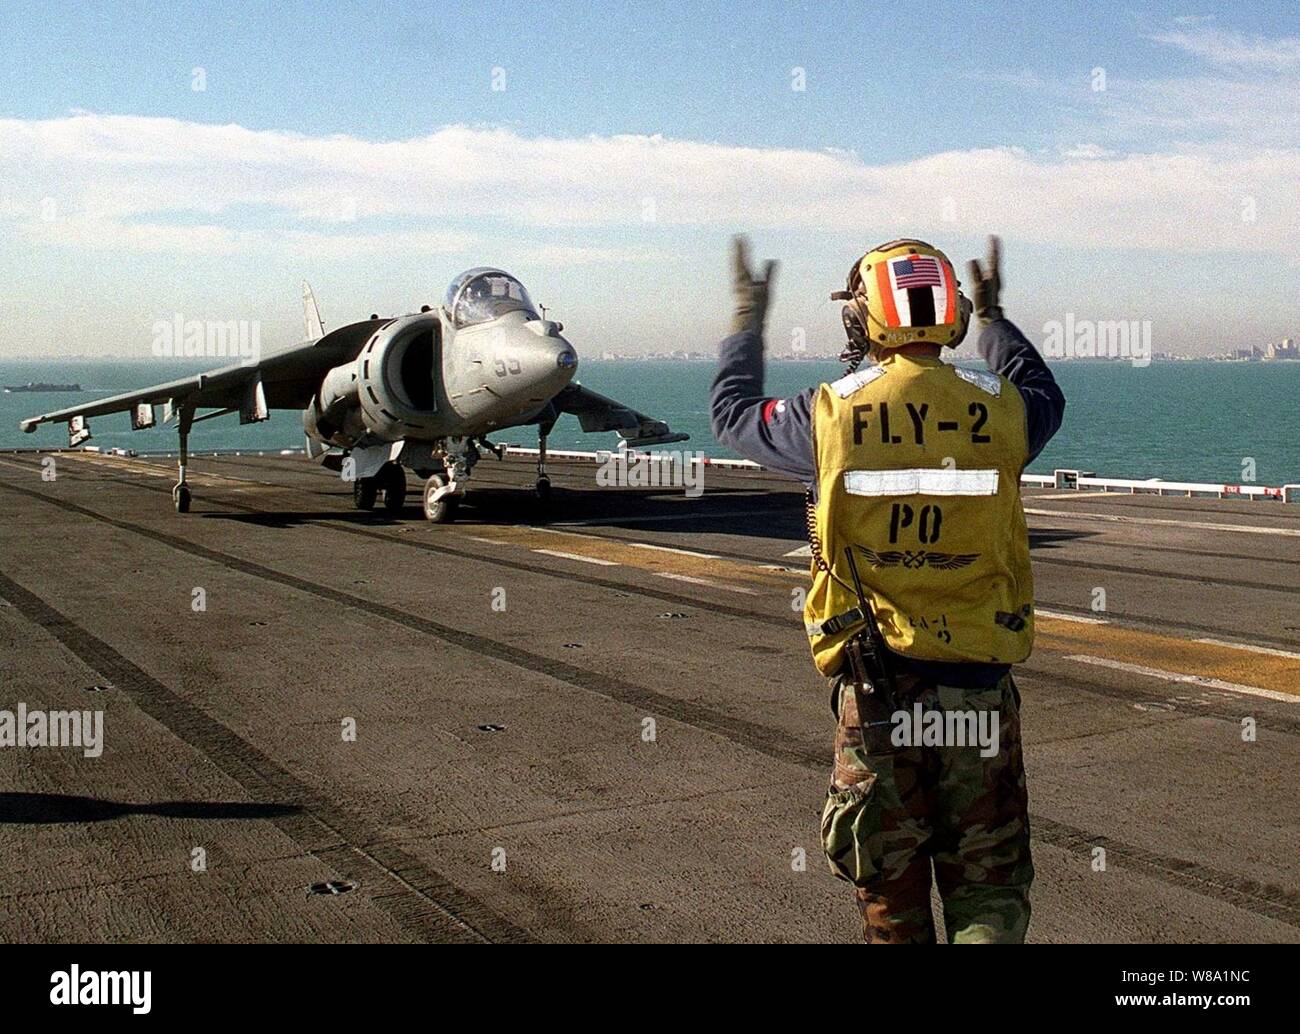 Petty Officer 2nd Class Mark Agurrie signals the pilot of an AV-8B Harrier to taxi aboard the amphibious assault ship USS Tarawa (LHA 1) as the ship operates off the coast of Kuwait City on March 23, 1998.  Tarawa is deployed to the Persian Gulf in support of Operation Southern Watch, which is the U.S. and coalition enforcement of the no-fly-zone over Southern Iraq.  Agurrie is a Navy aviation boatswain's mate. Stock Photo